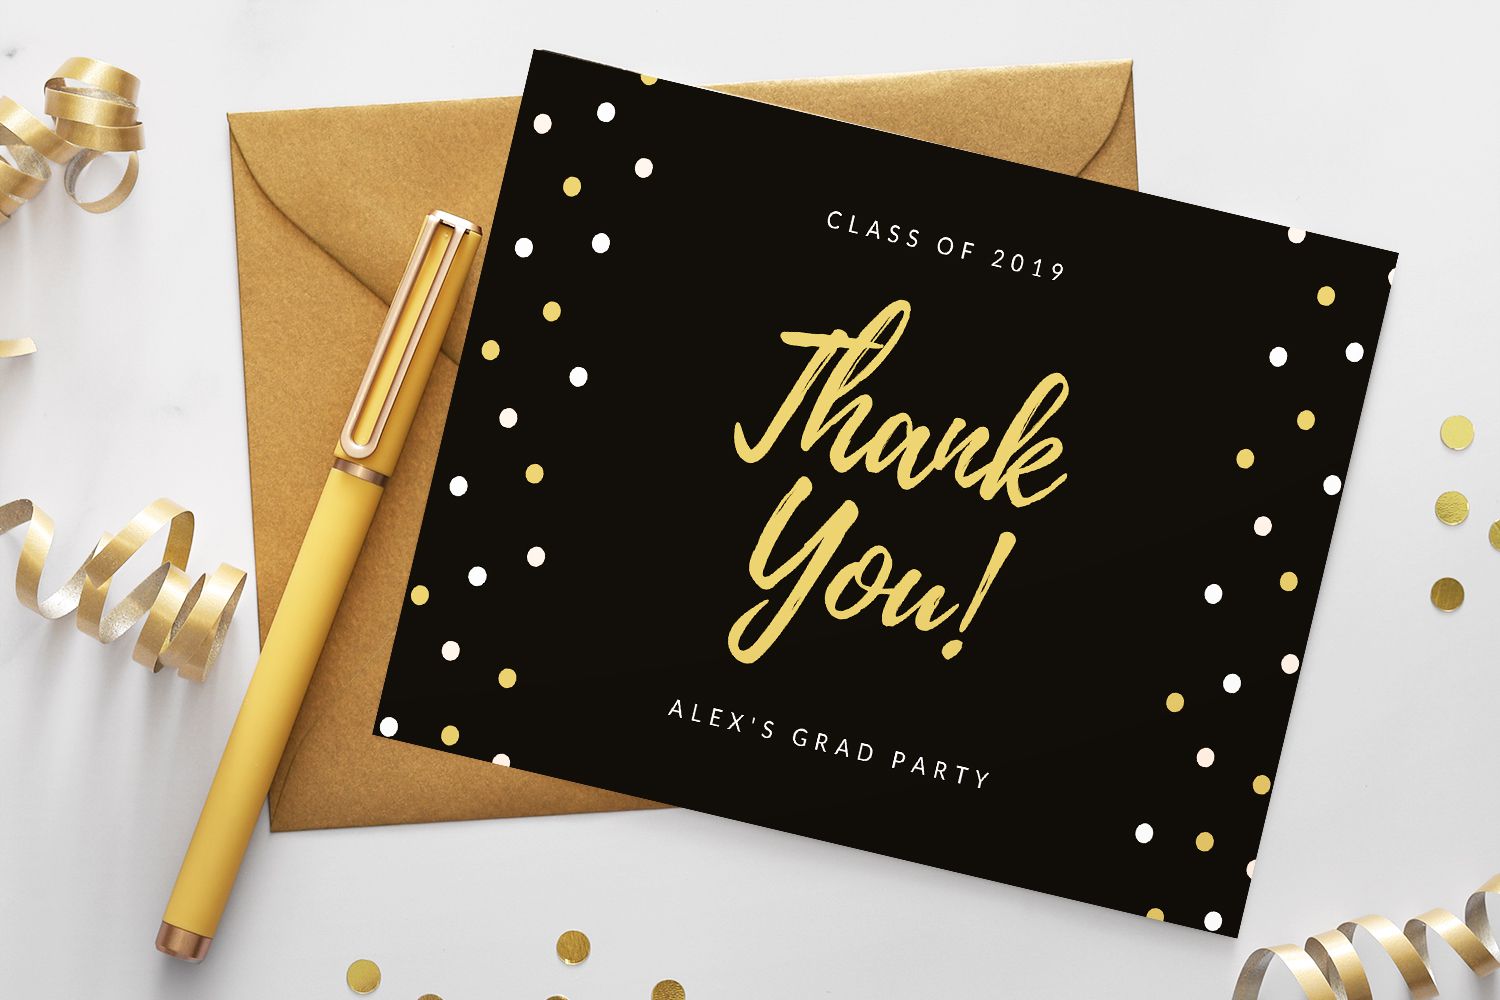 Appreciation In Style With Amazing Custom Thank You Cards 4OVER4 COM